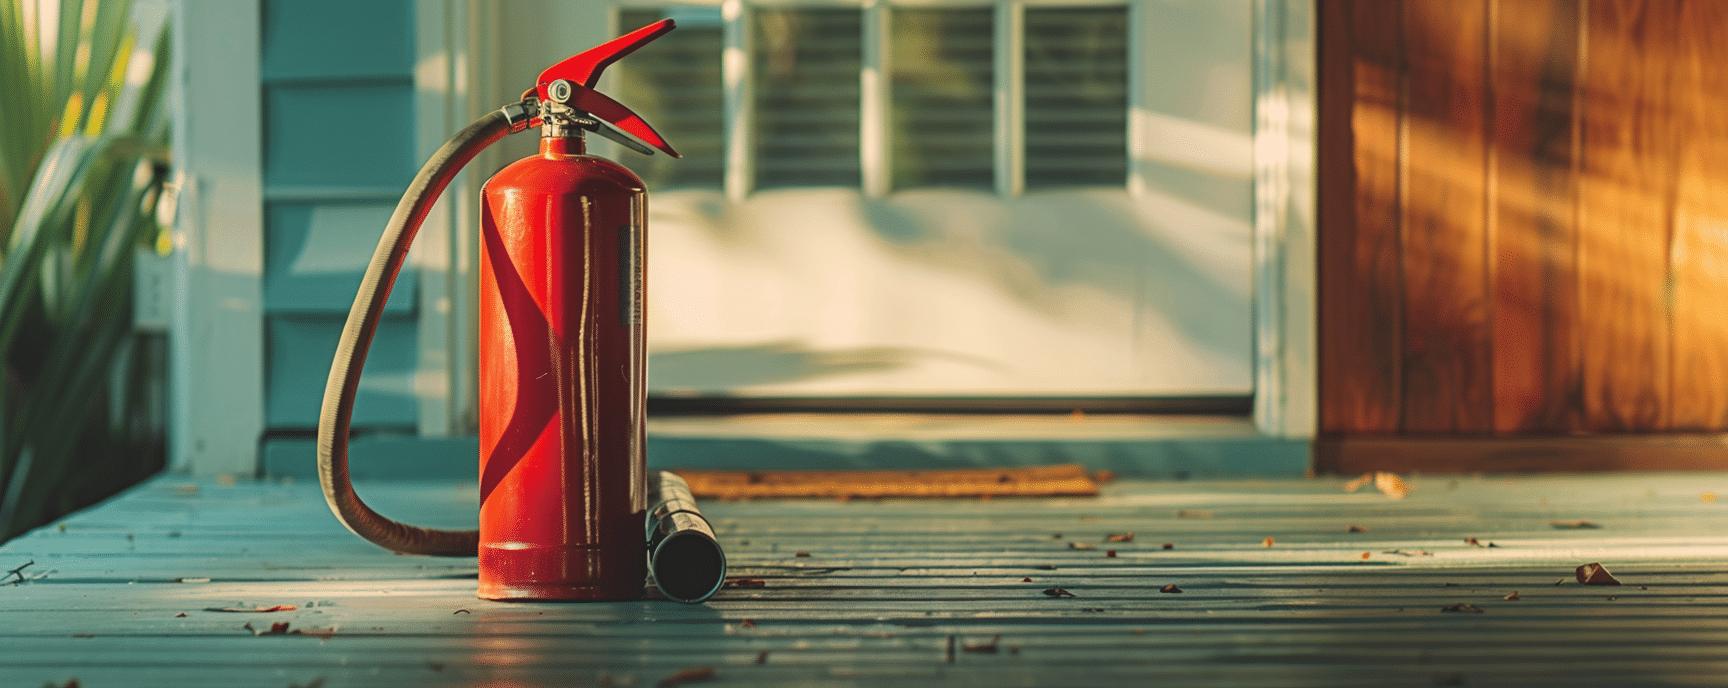 Selecting the right fire extinguisher is not just about grabbing the nearest red canister; it’s about knowing which type will triumph over an electrical fire.